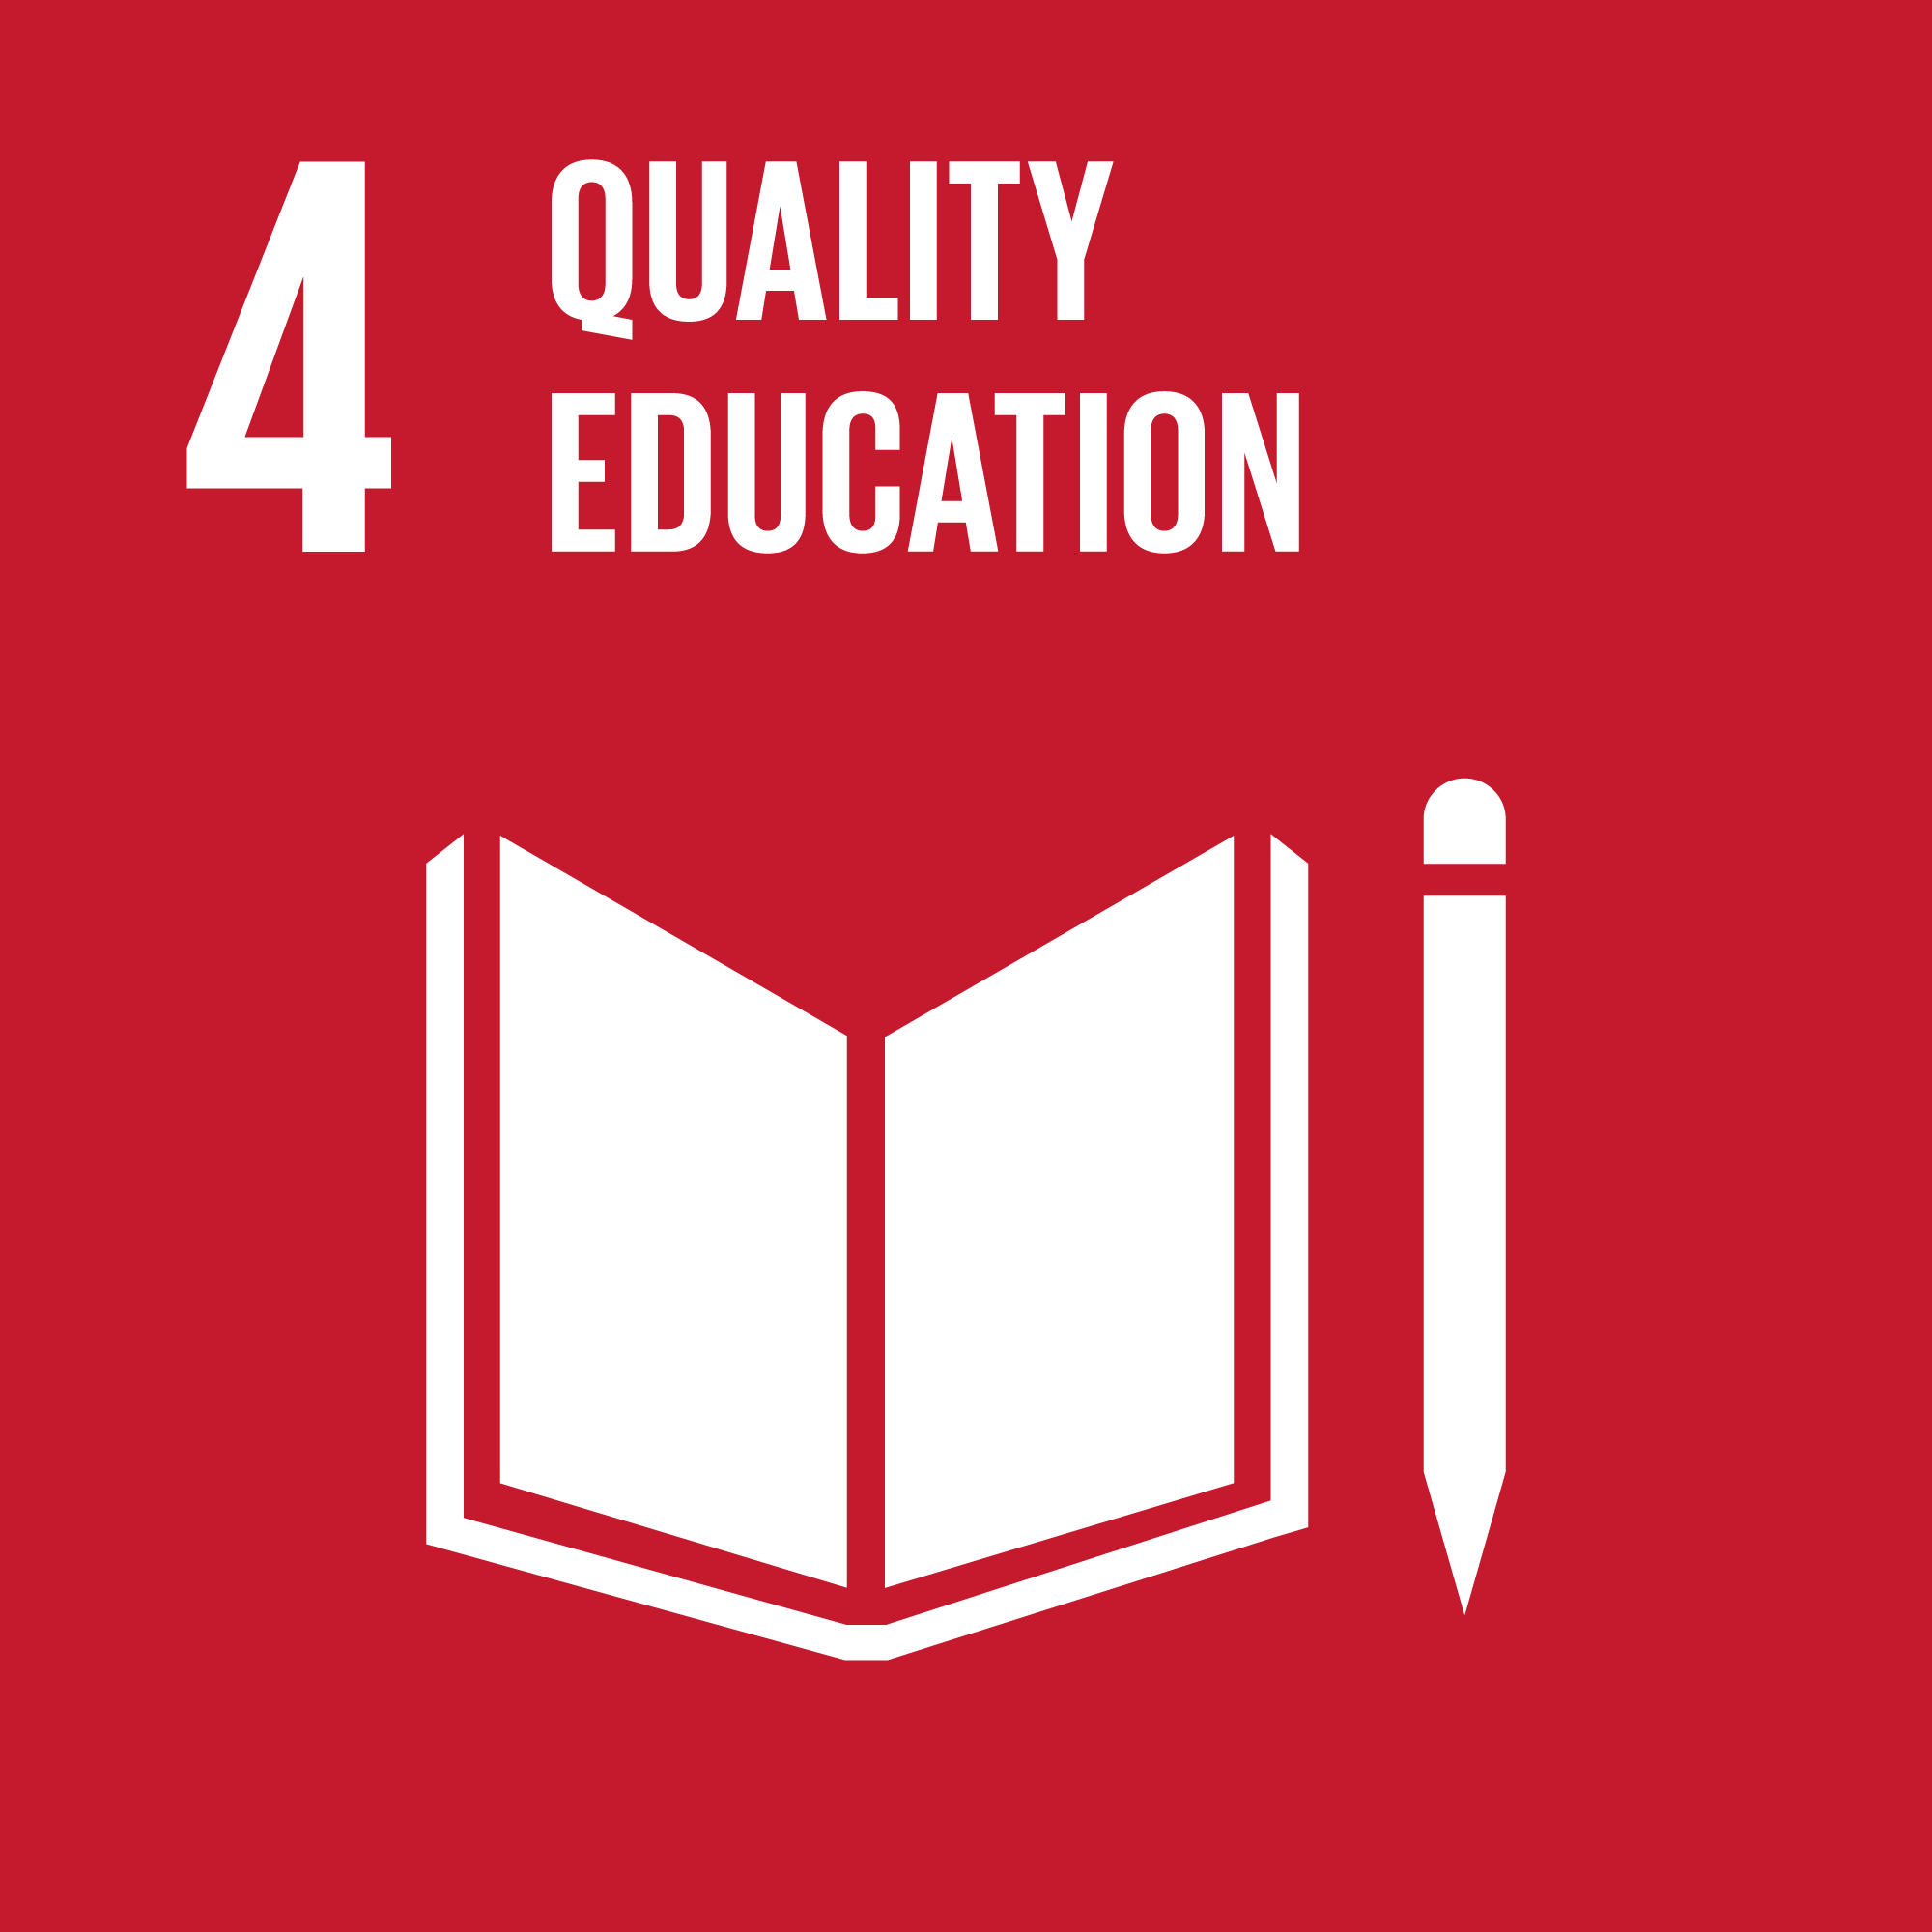 goals of education 4.0